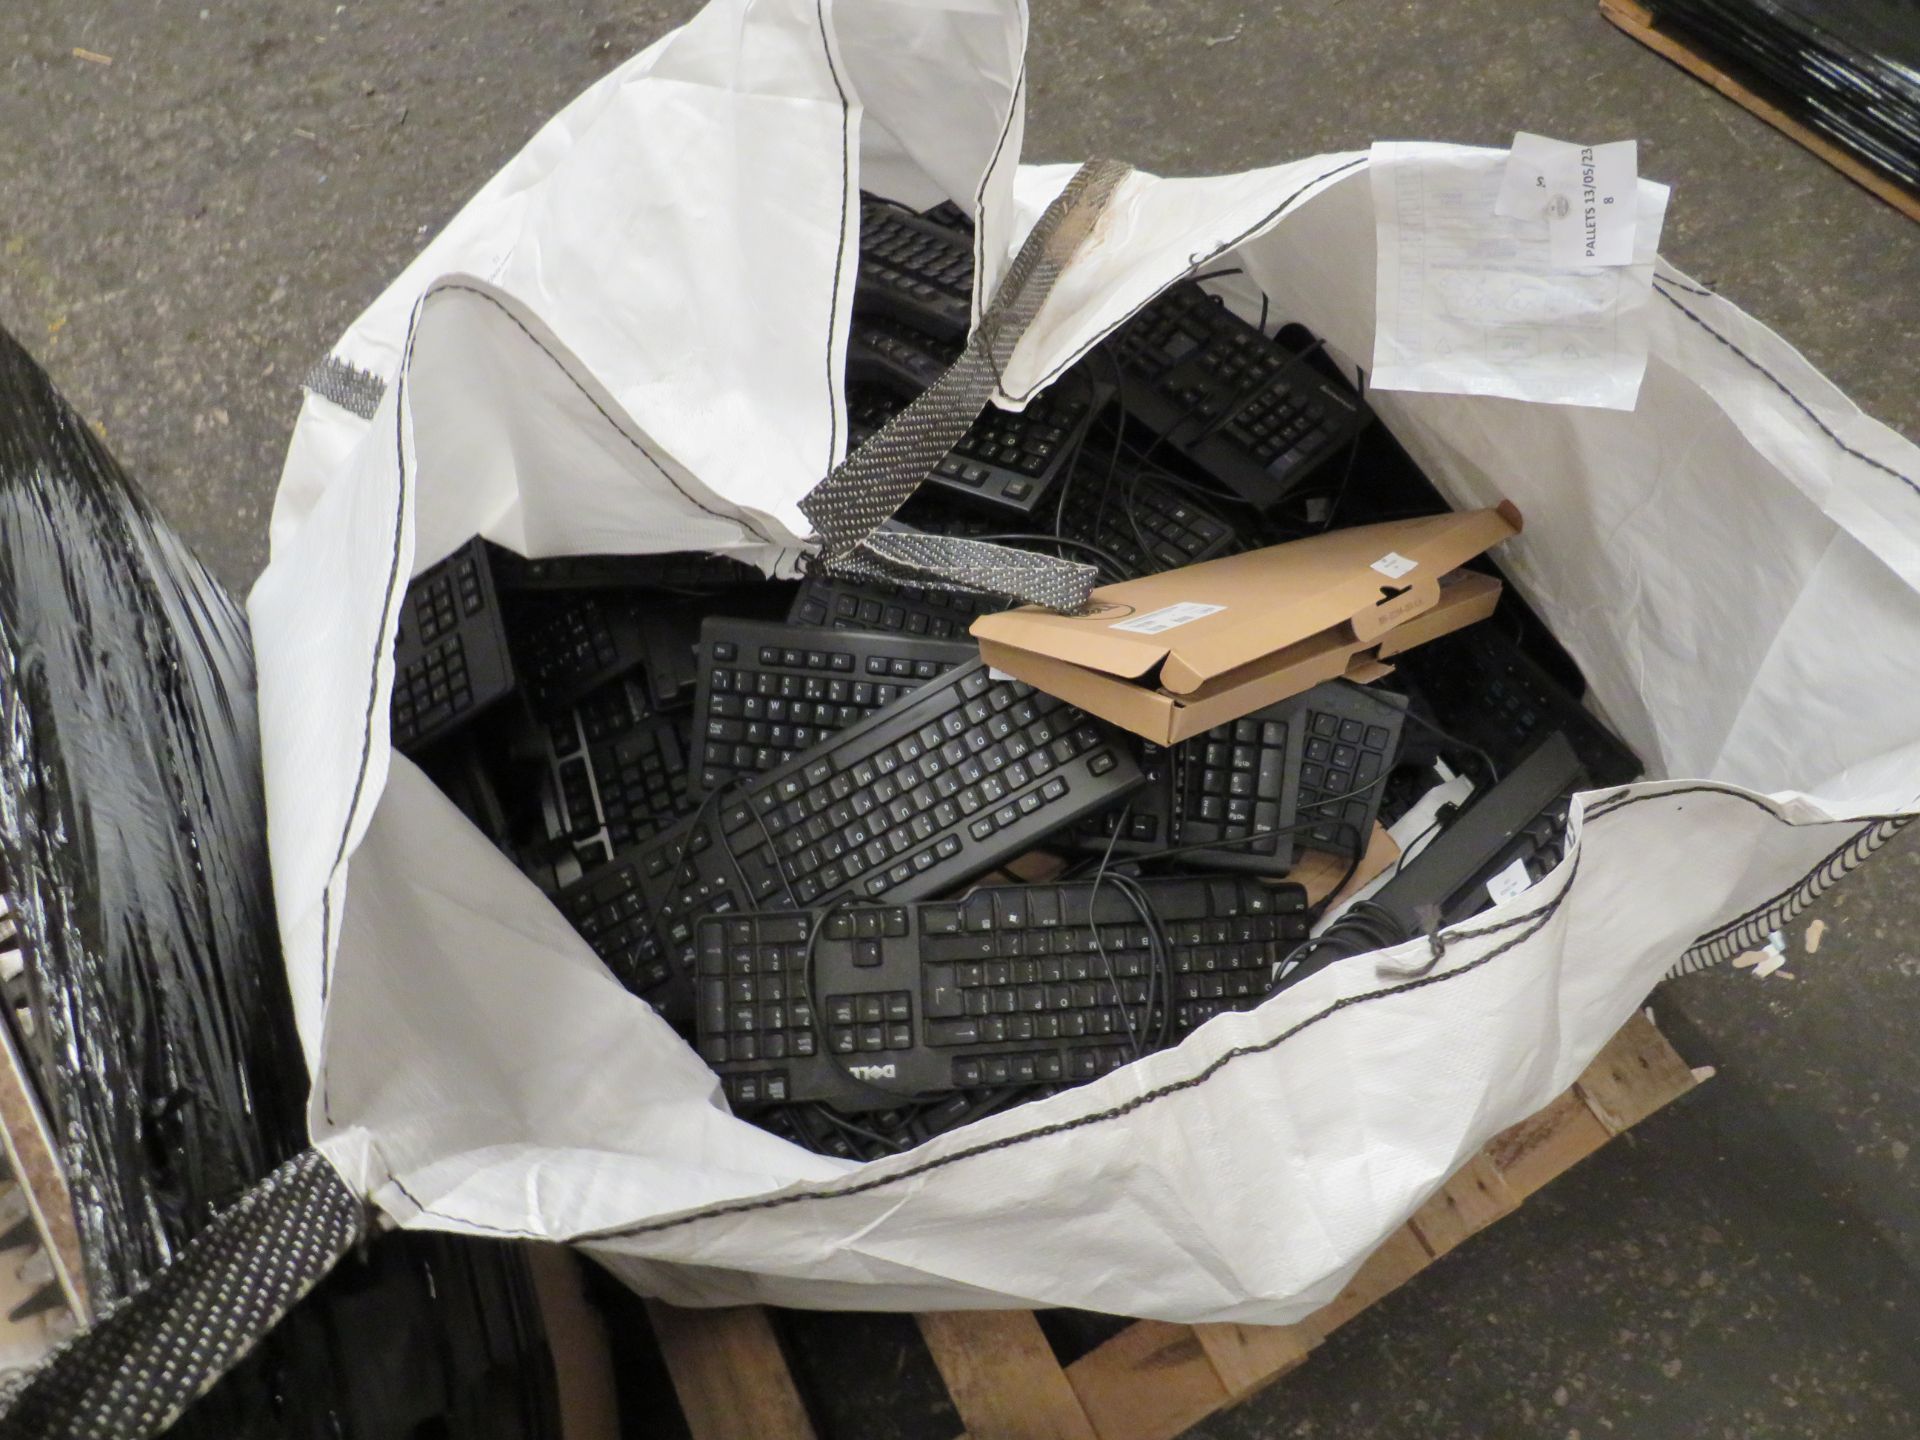 1x Ton Bag Containing Approx 40+ Assorted Keyboards - All Unchecked, All Have No Packaging.